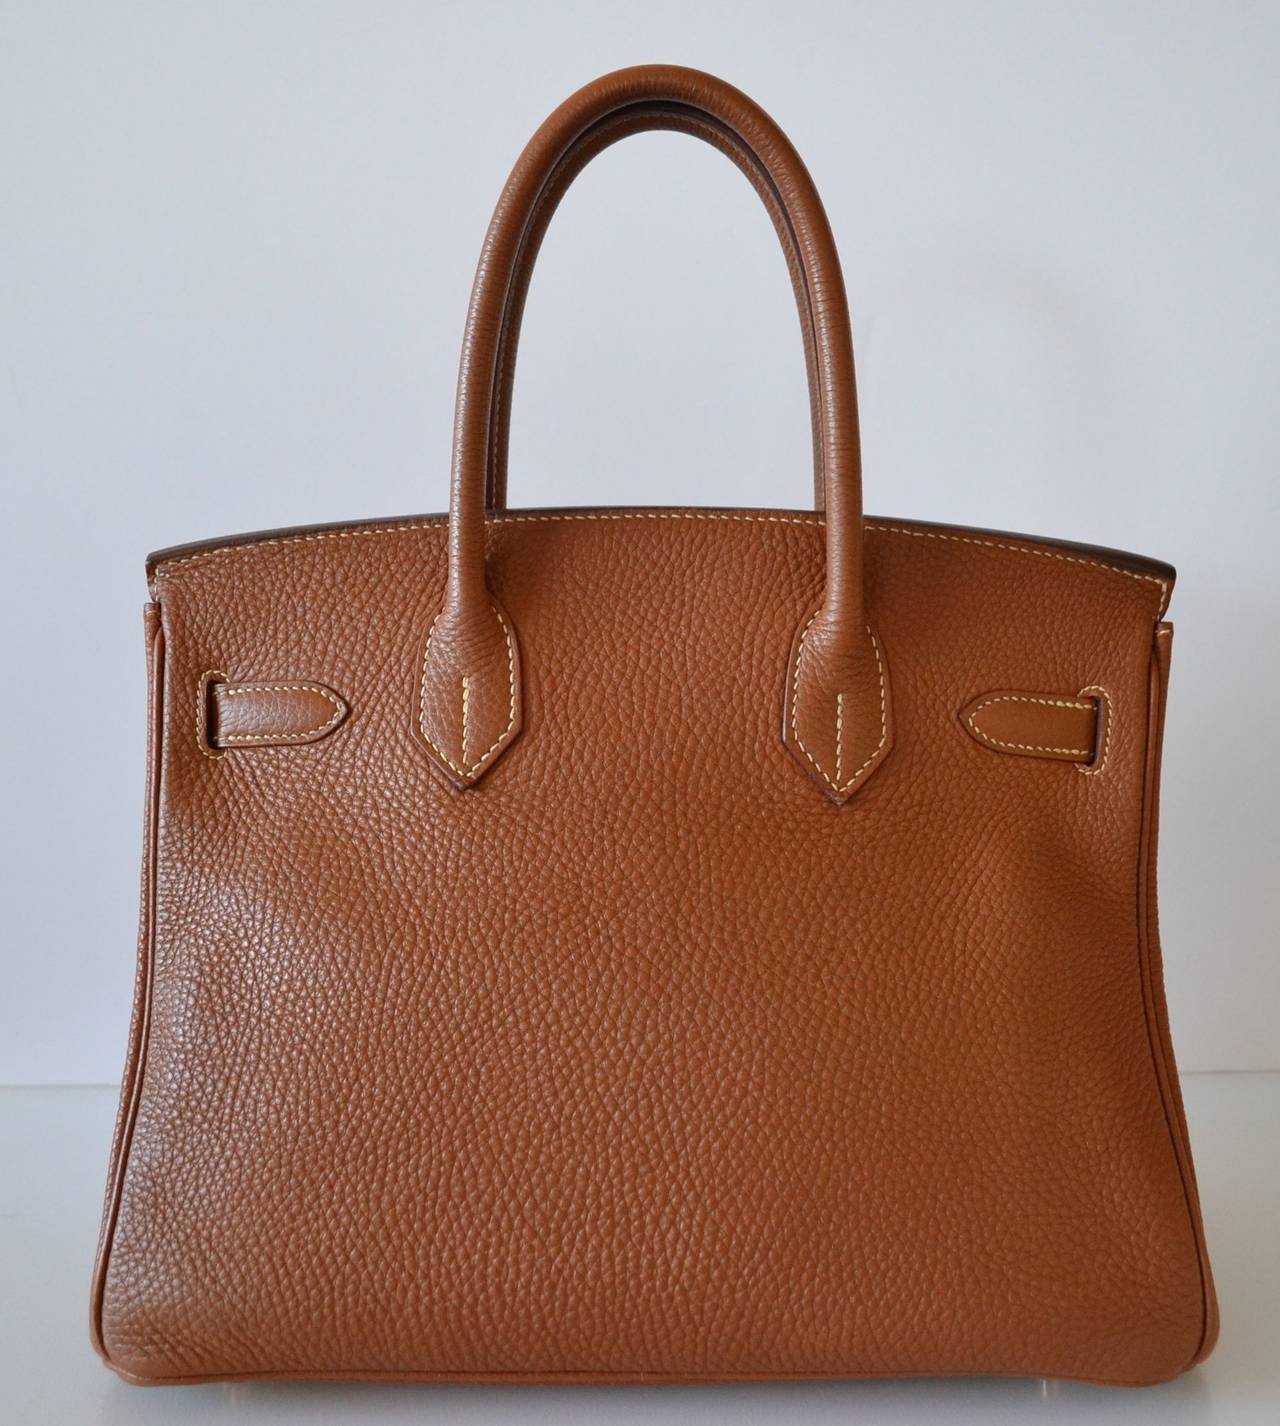 Hermes Birkin 30 Togo Gold
 
Togo leather with gold plated hardware
 
Very Good condition 
Stamp G
Hermes Paris - Made In France
 
Togo leather is in very good condition - Interior is odorless - Corners are good - Hardware is in very good